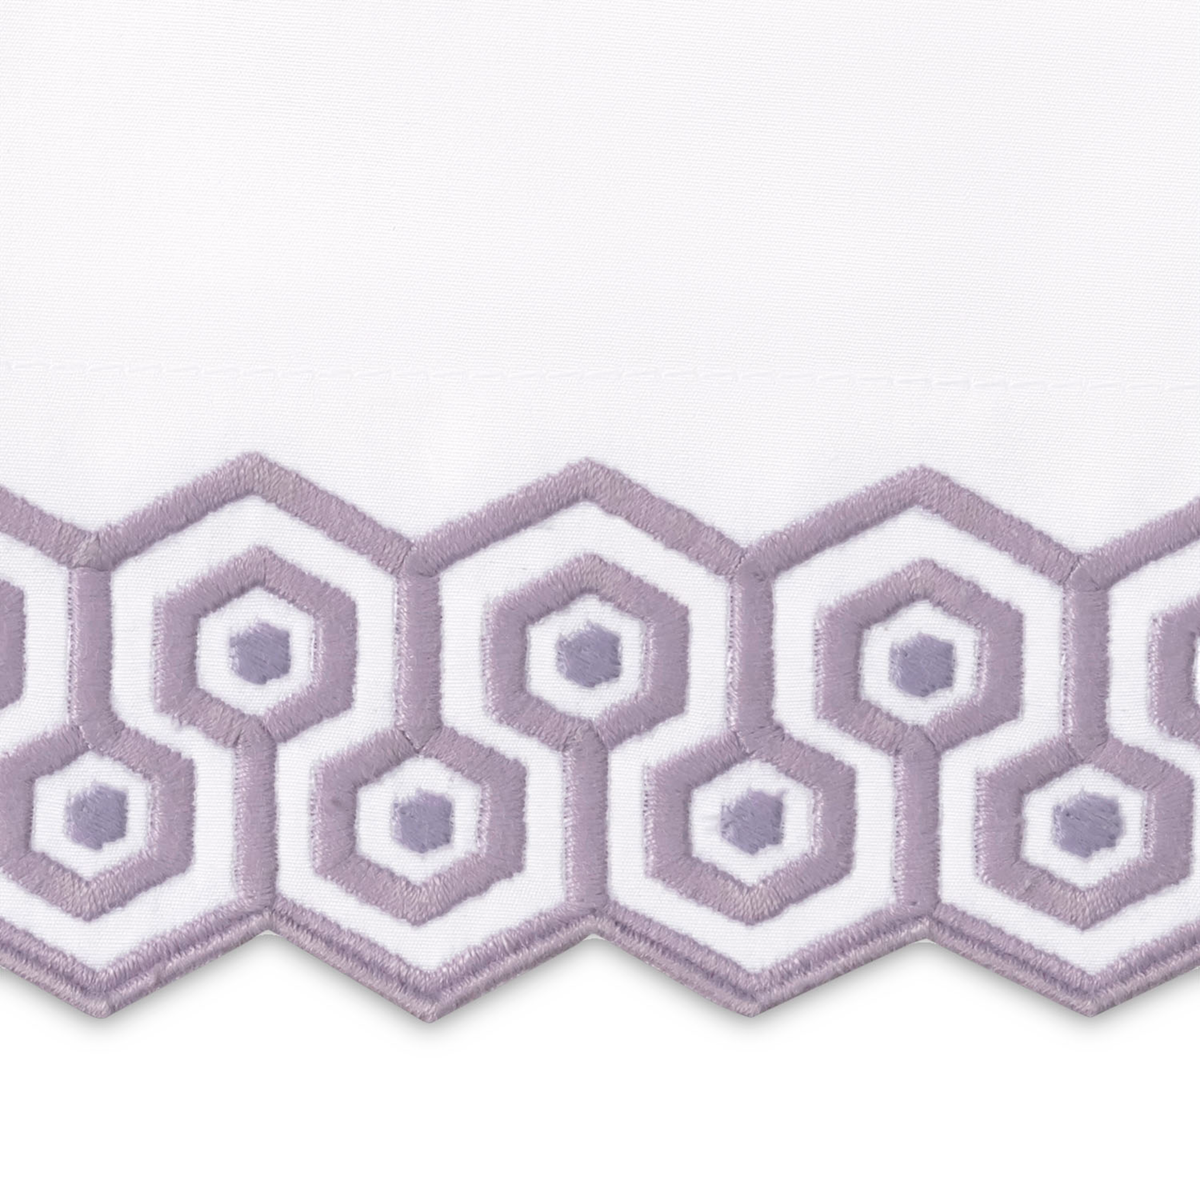 Swatch Sample of Stack of Matouk Felix Bedding in Lilac  Color